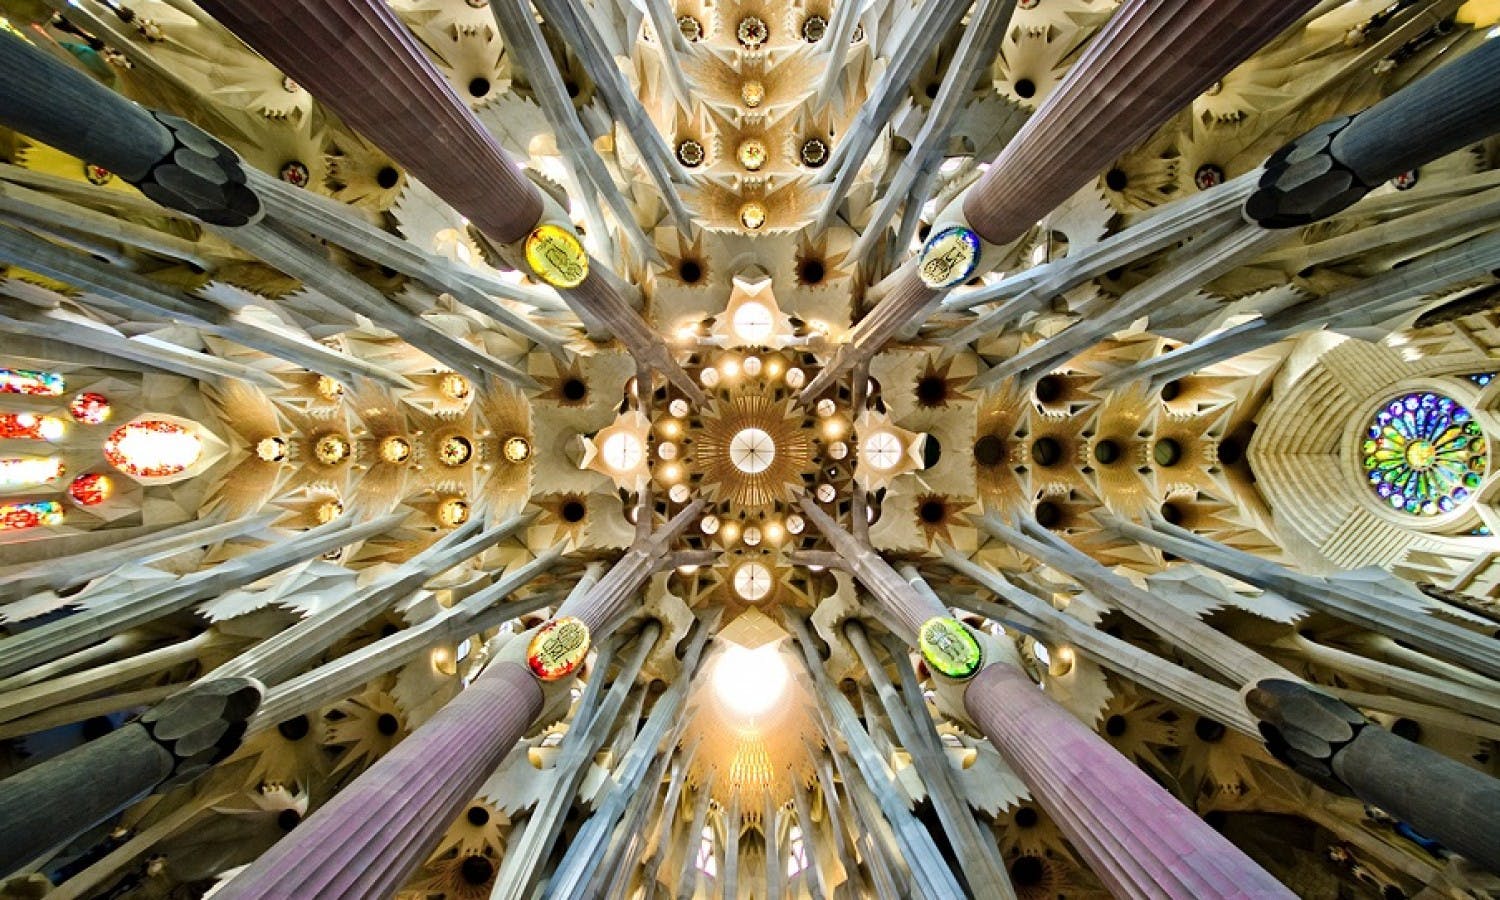 sagrada-familia-skip-the-line-tickets-and-guided-visit_header-18860